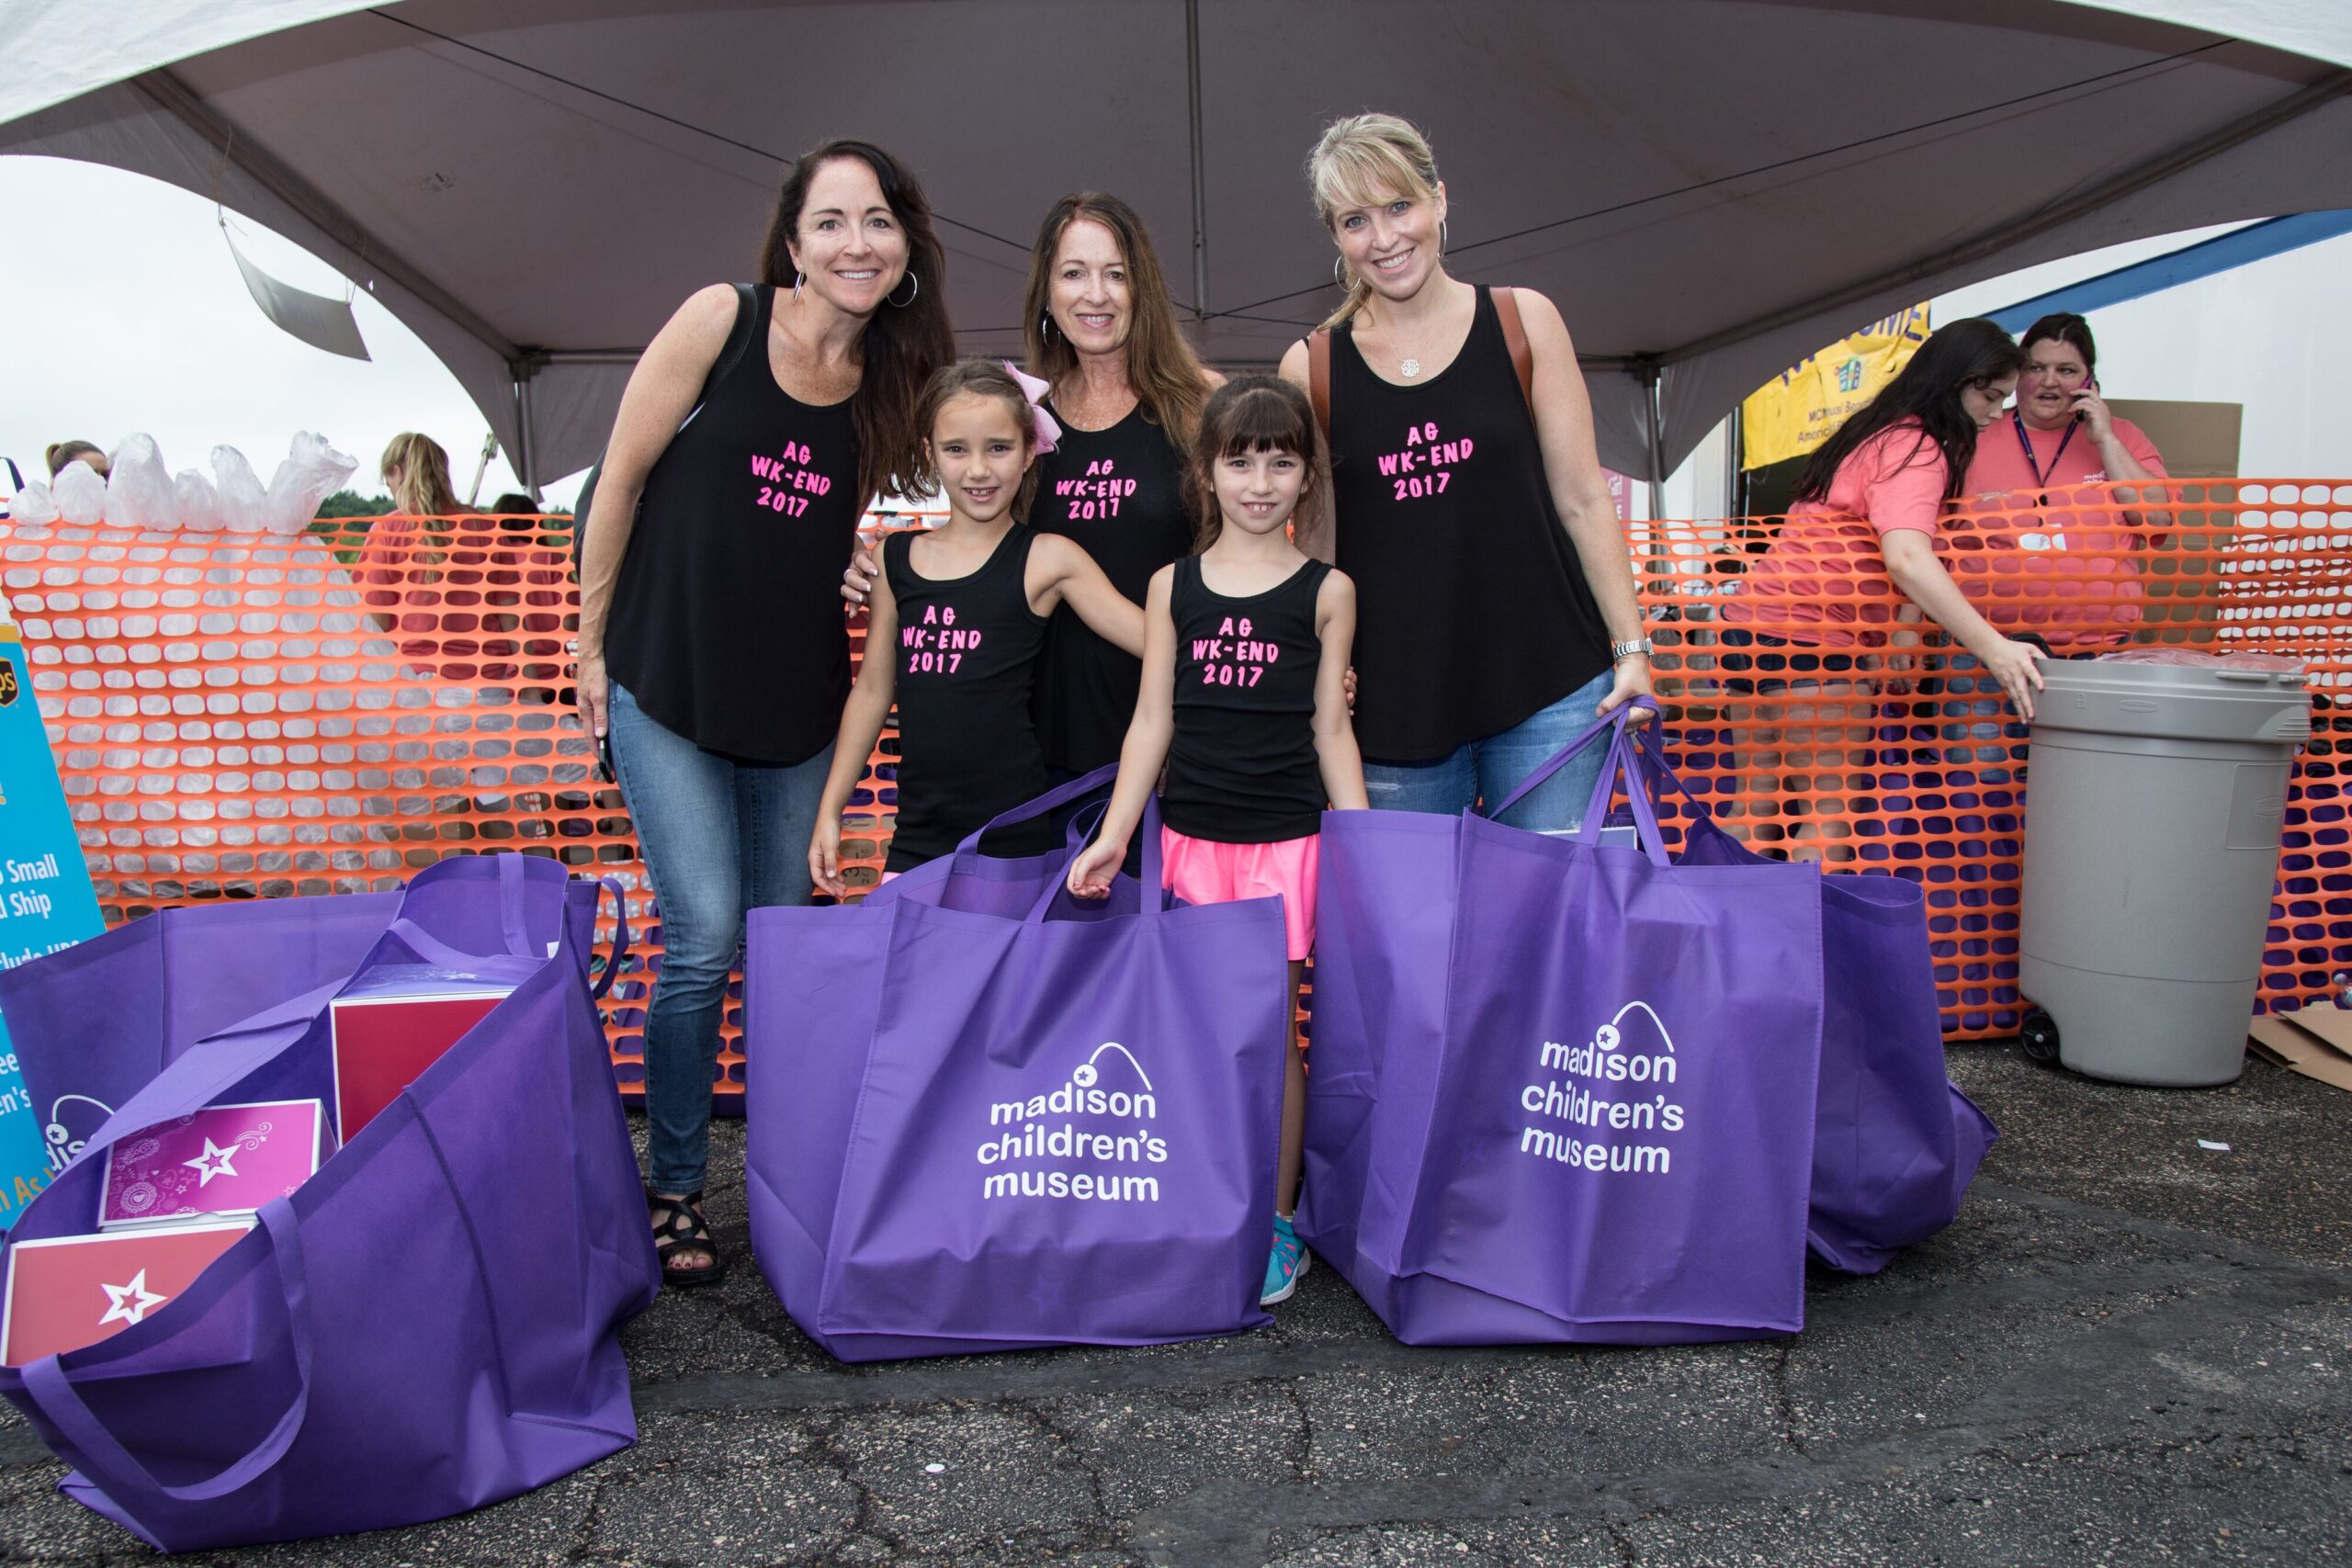 Fans wear custom shirts while shopping at the annual American Girl benefit.